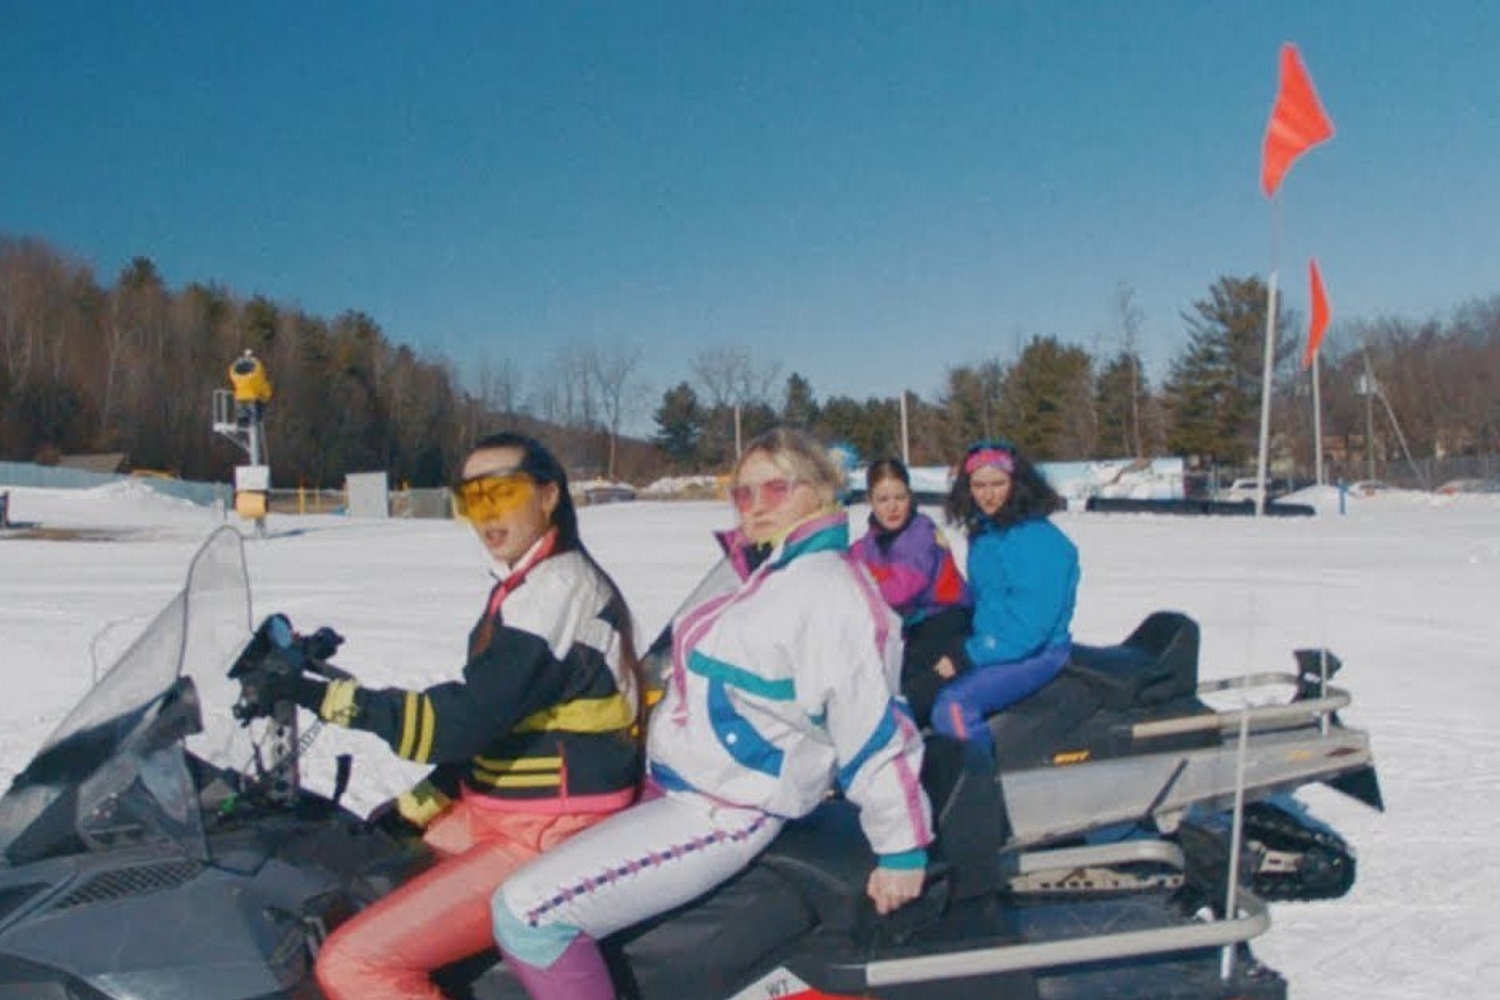 Hinds take to the ski slopes in their video for ‘The Club’